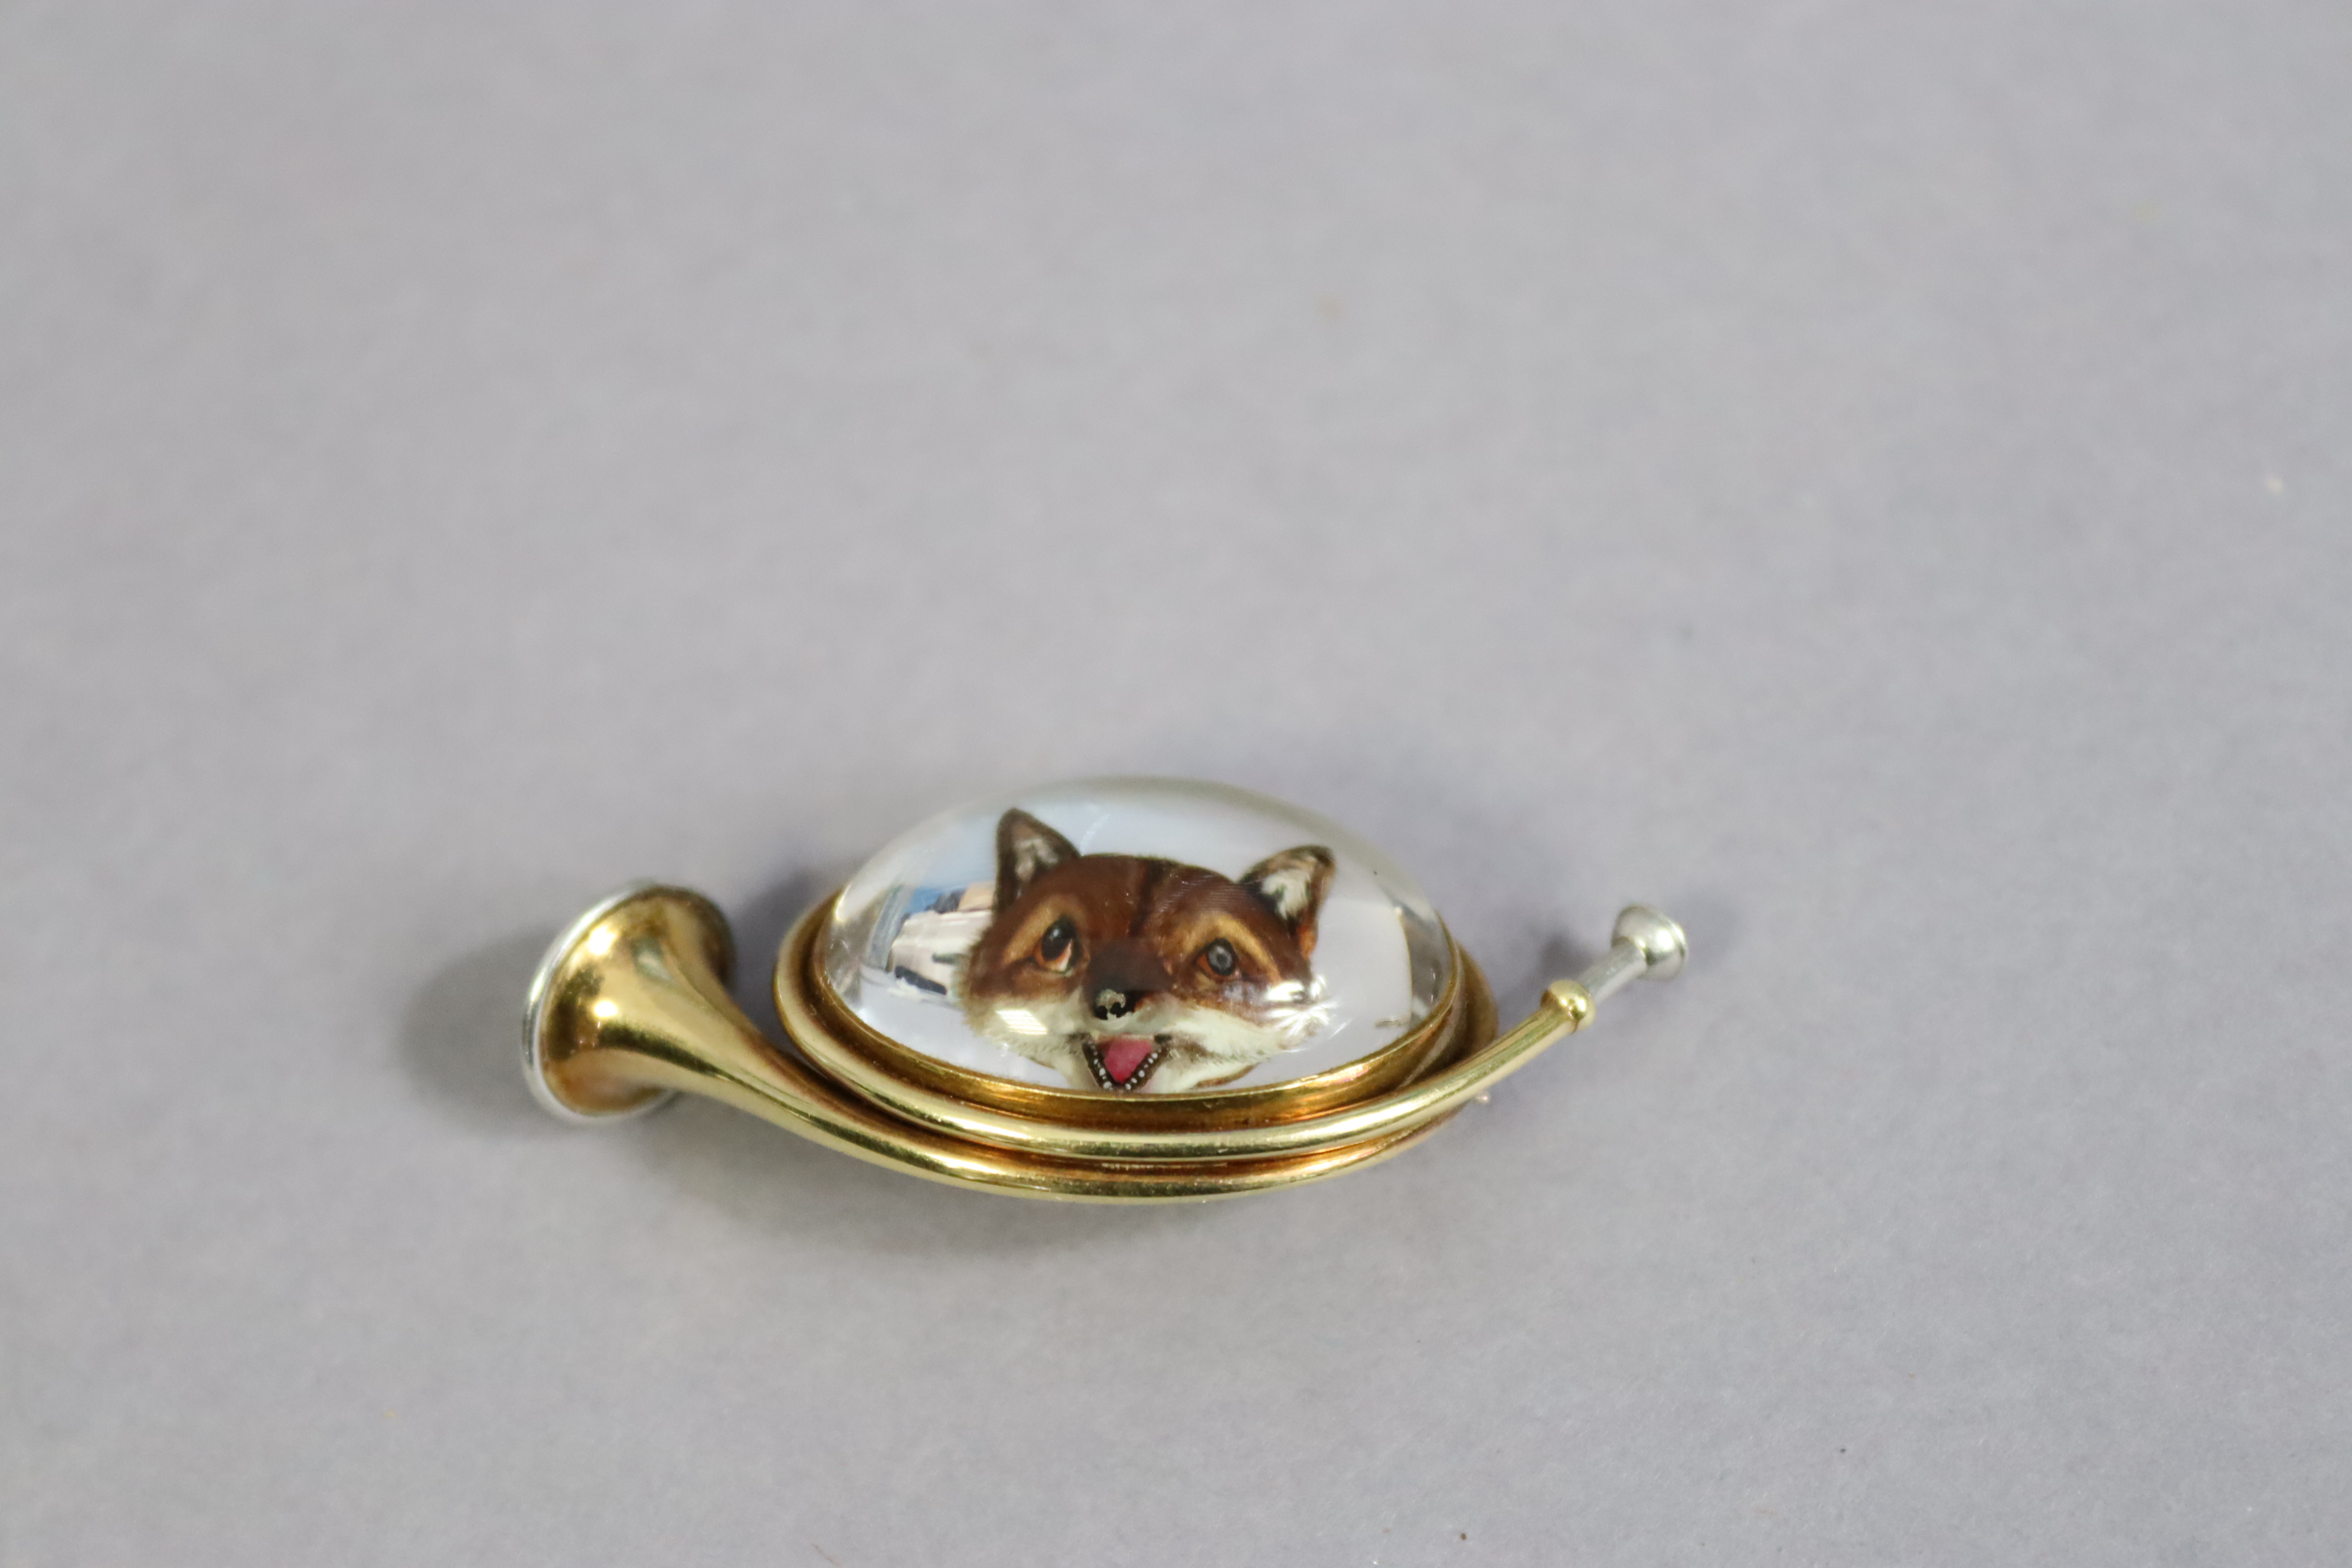 A Tiffany & Co yellow & white-metal novelty hunting horn brooch inset with Essex crystal fox - Image 2 of 4